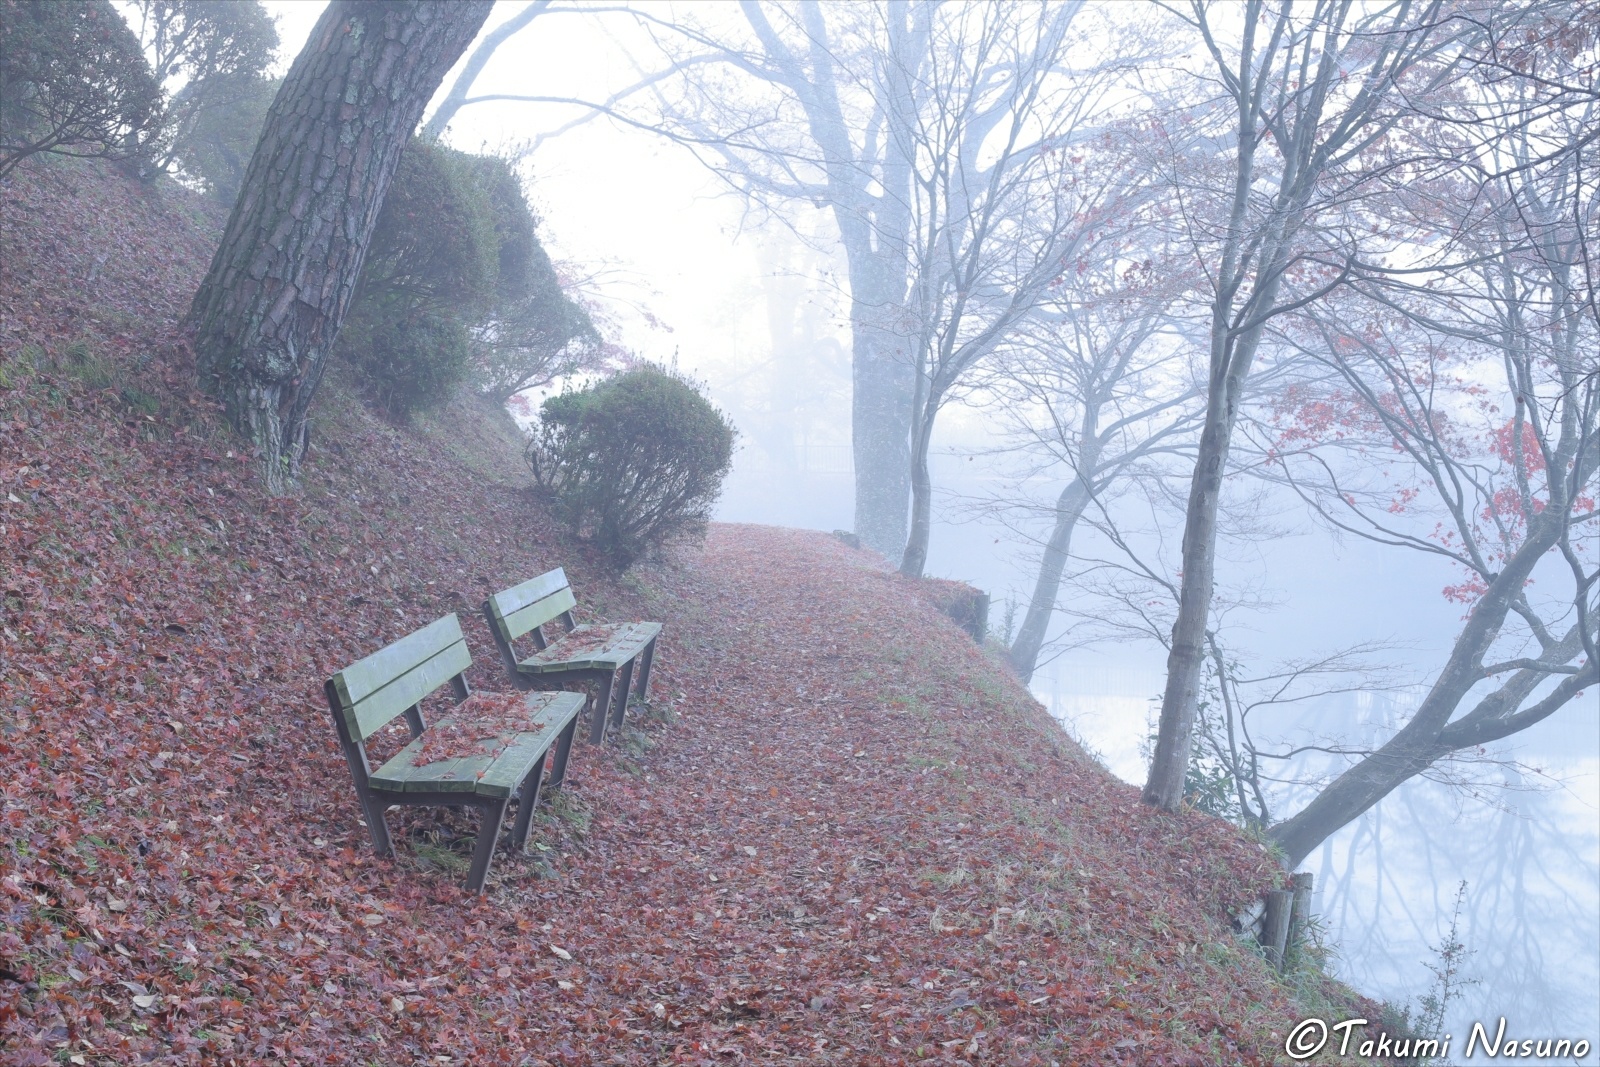 Benches at the Site of Tanagura Casltle in the Mist